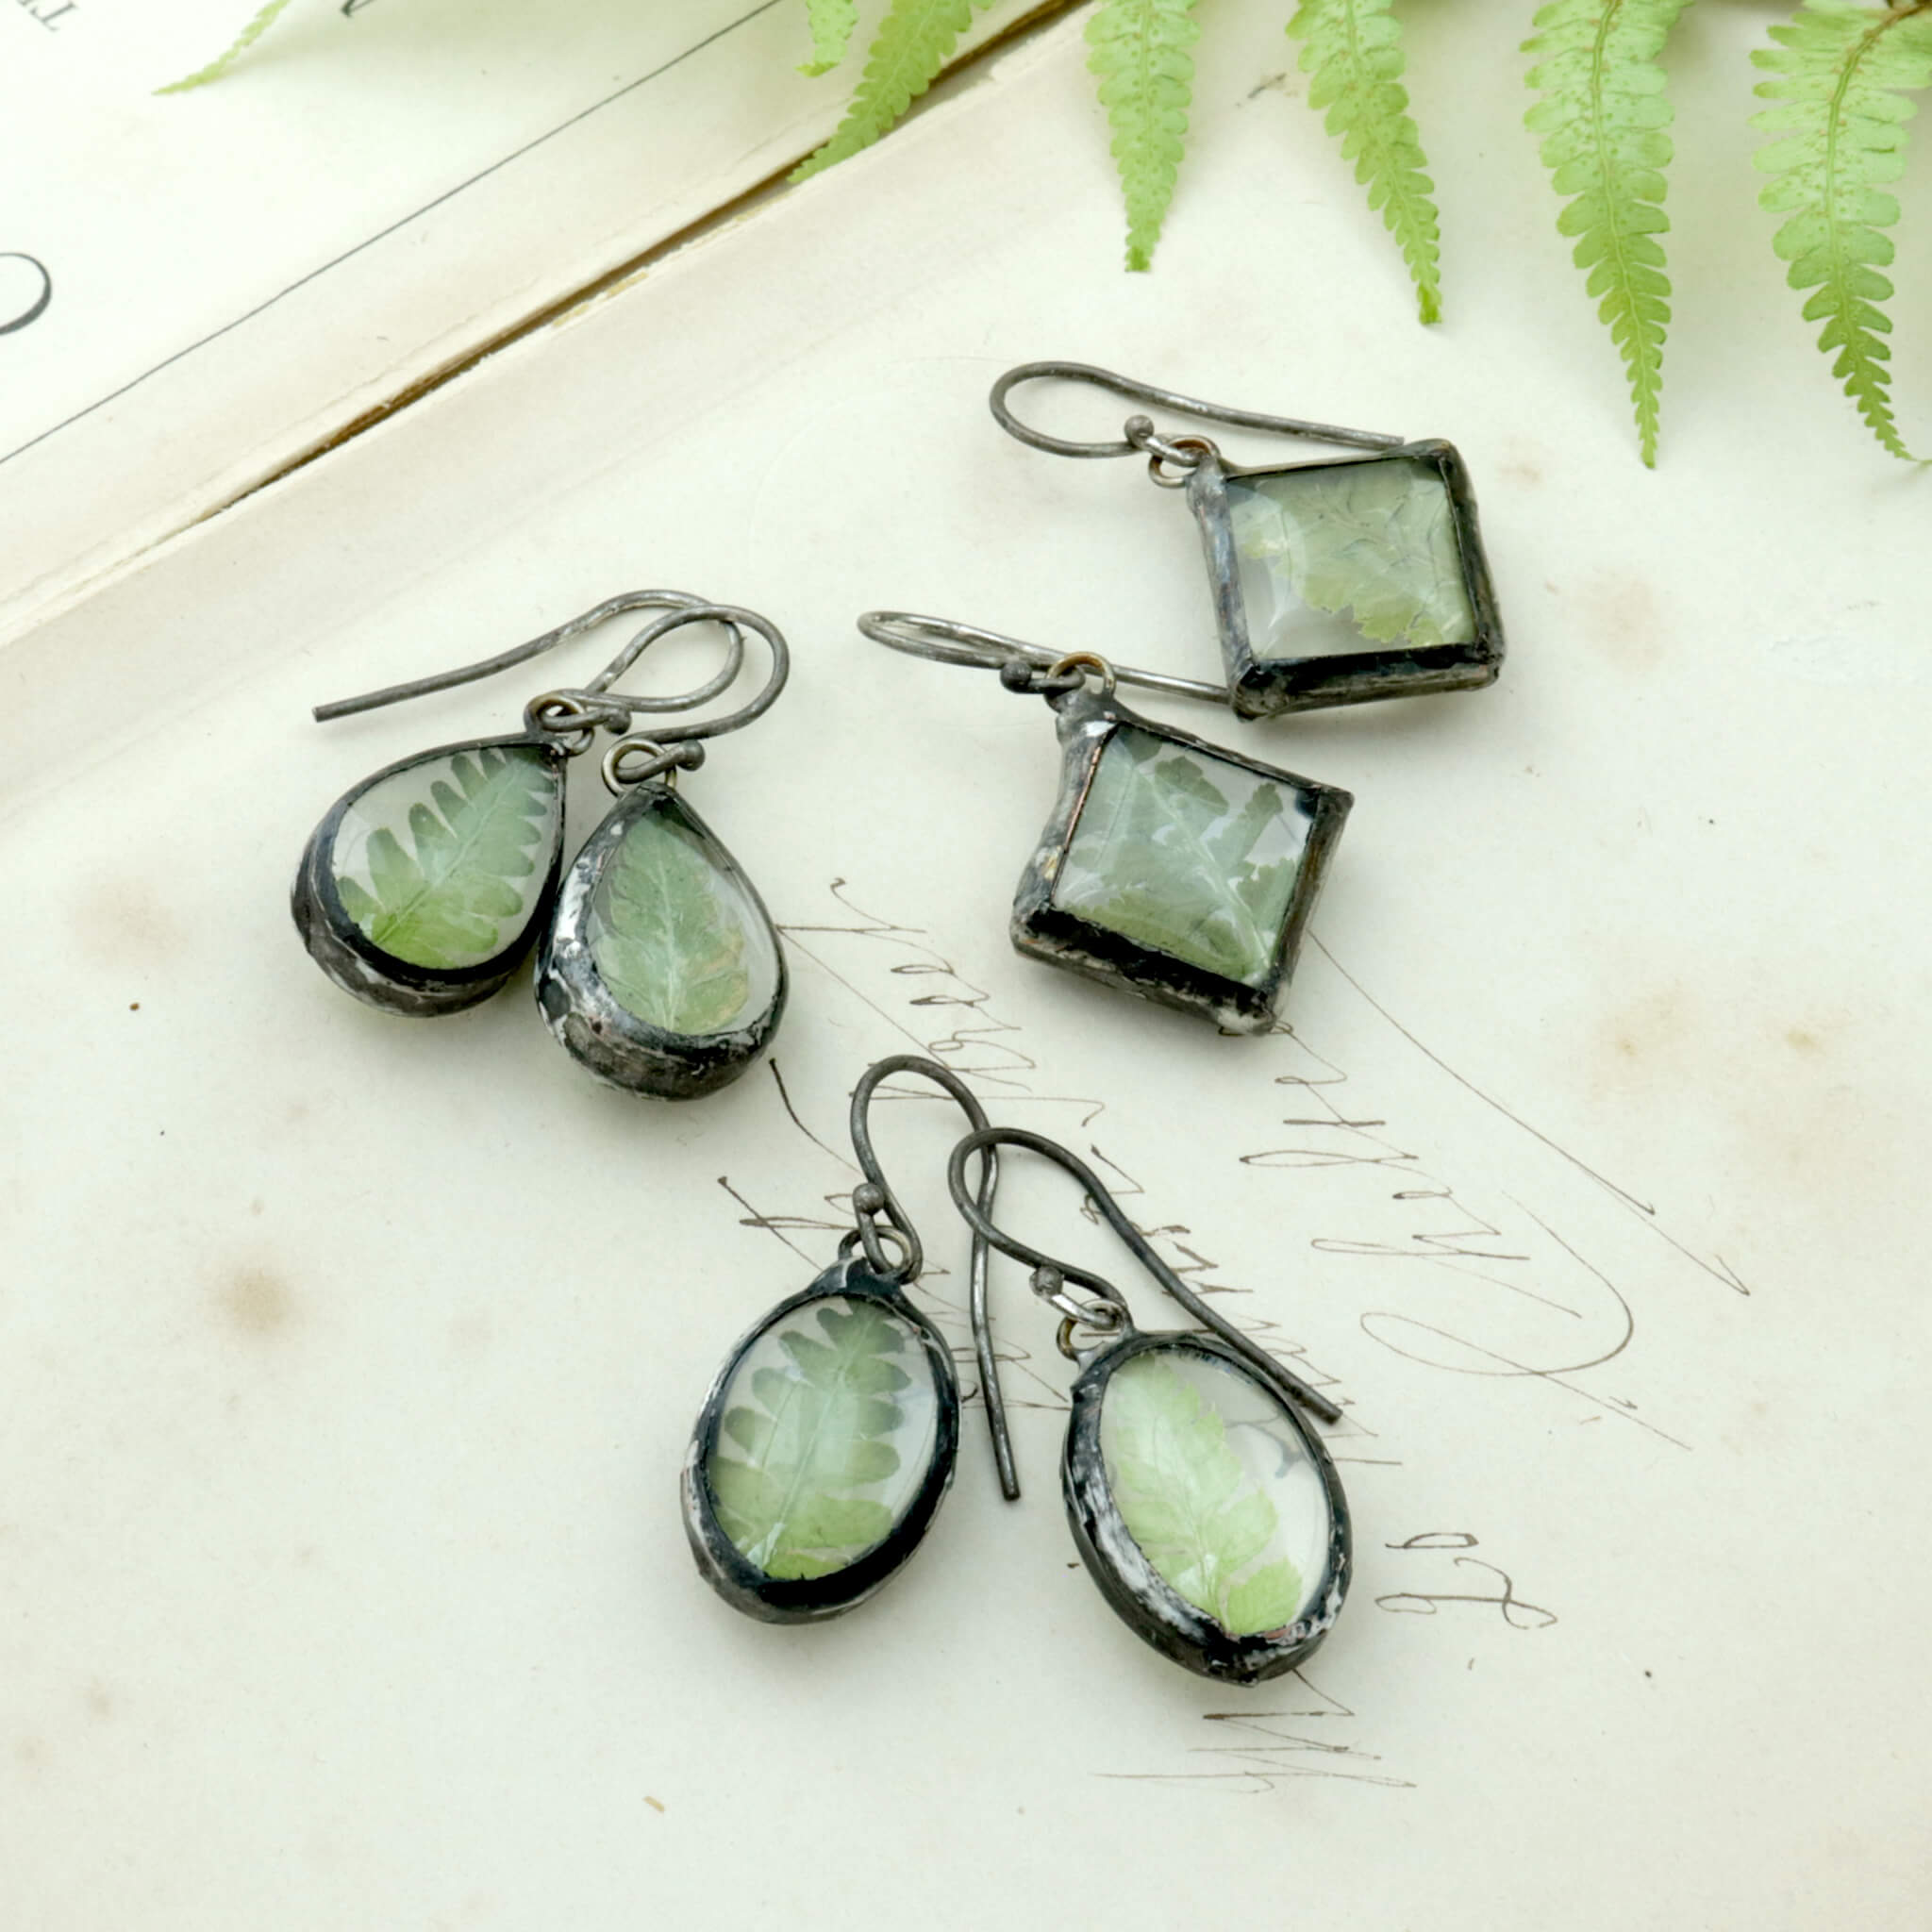 3 sets of earrings with fern inside of a glass